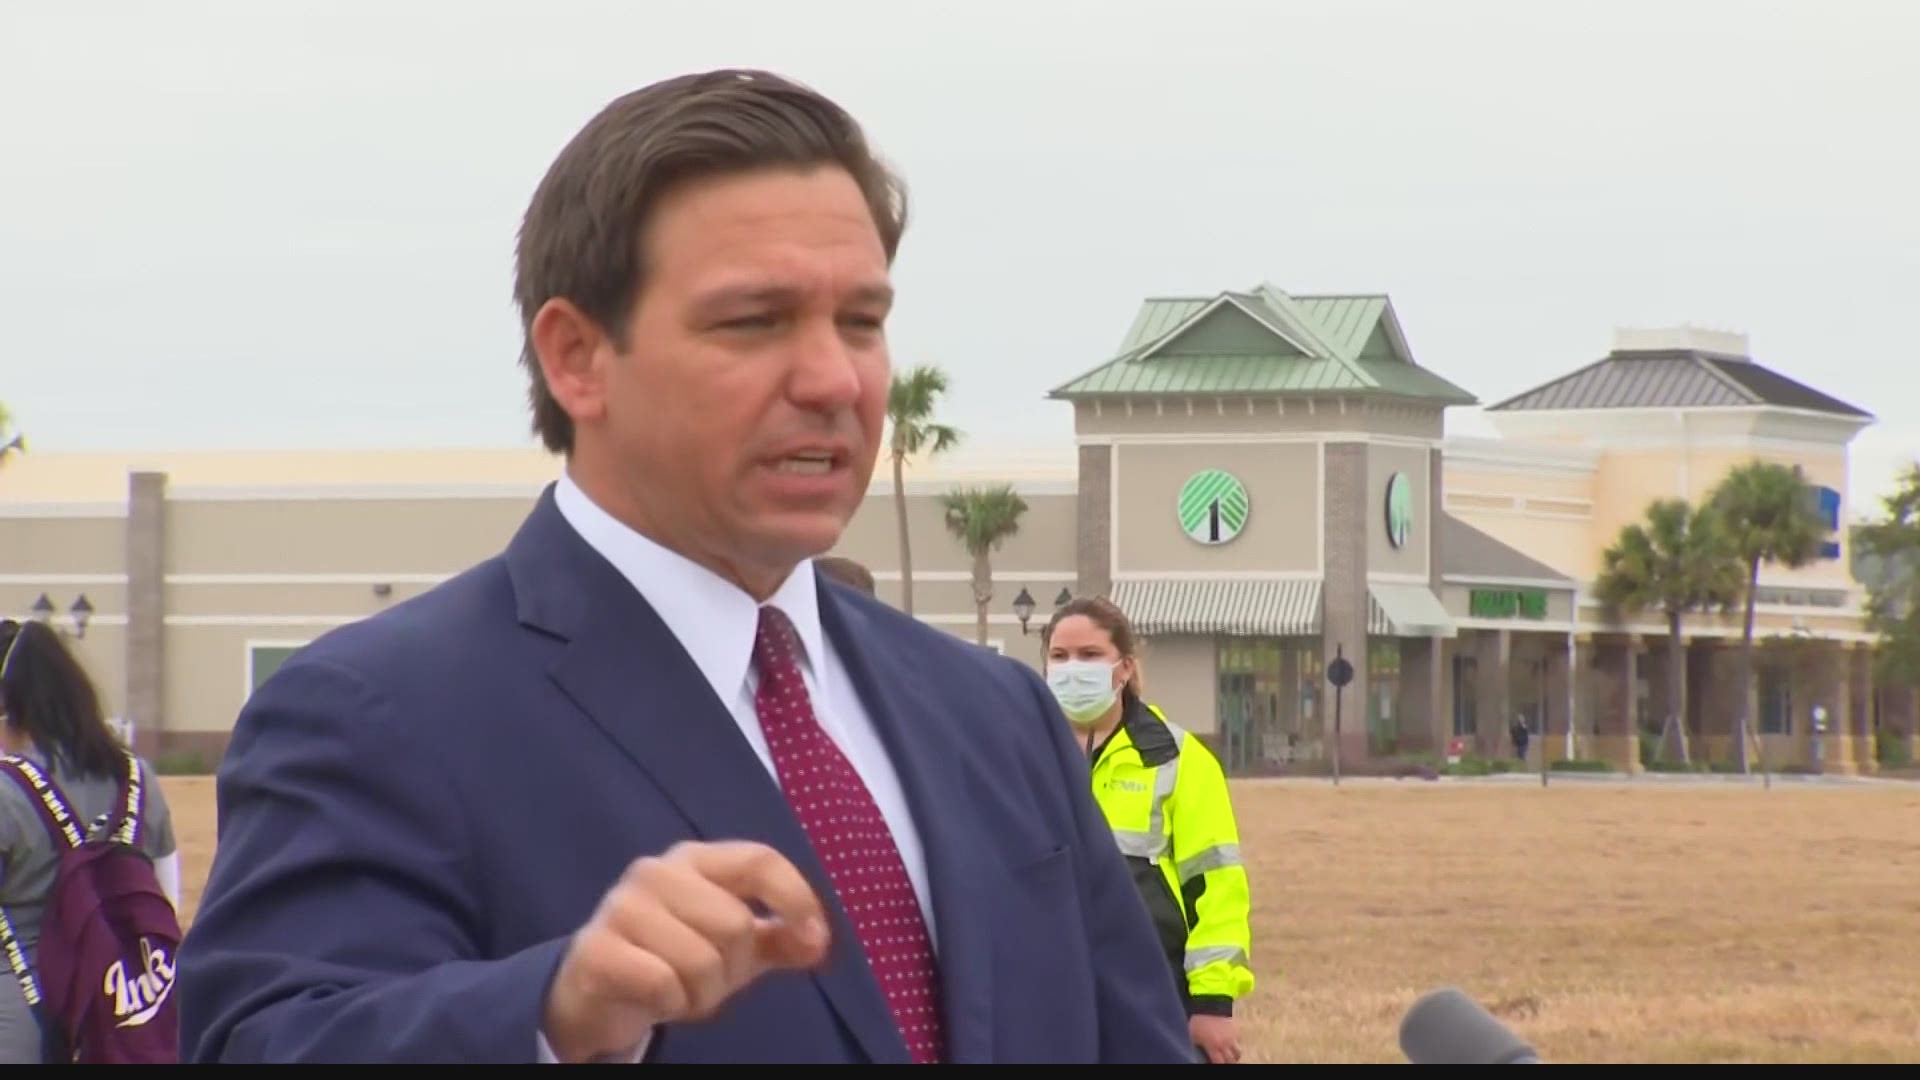 Florida Gov. Ron DeSantis visited The Villages Tuesday to elaborate on current and future plans for COVID-19 vaccination in Florida.